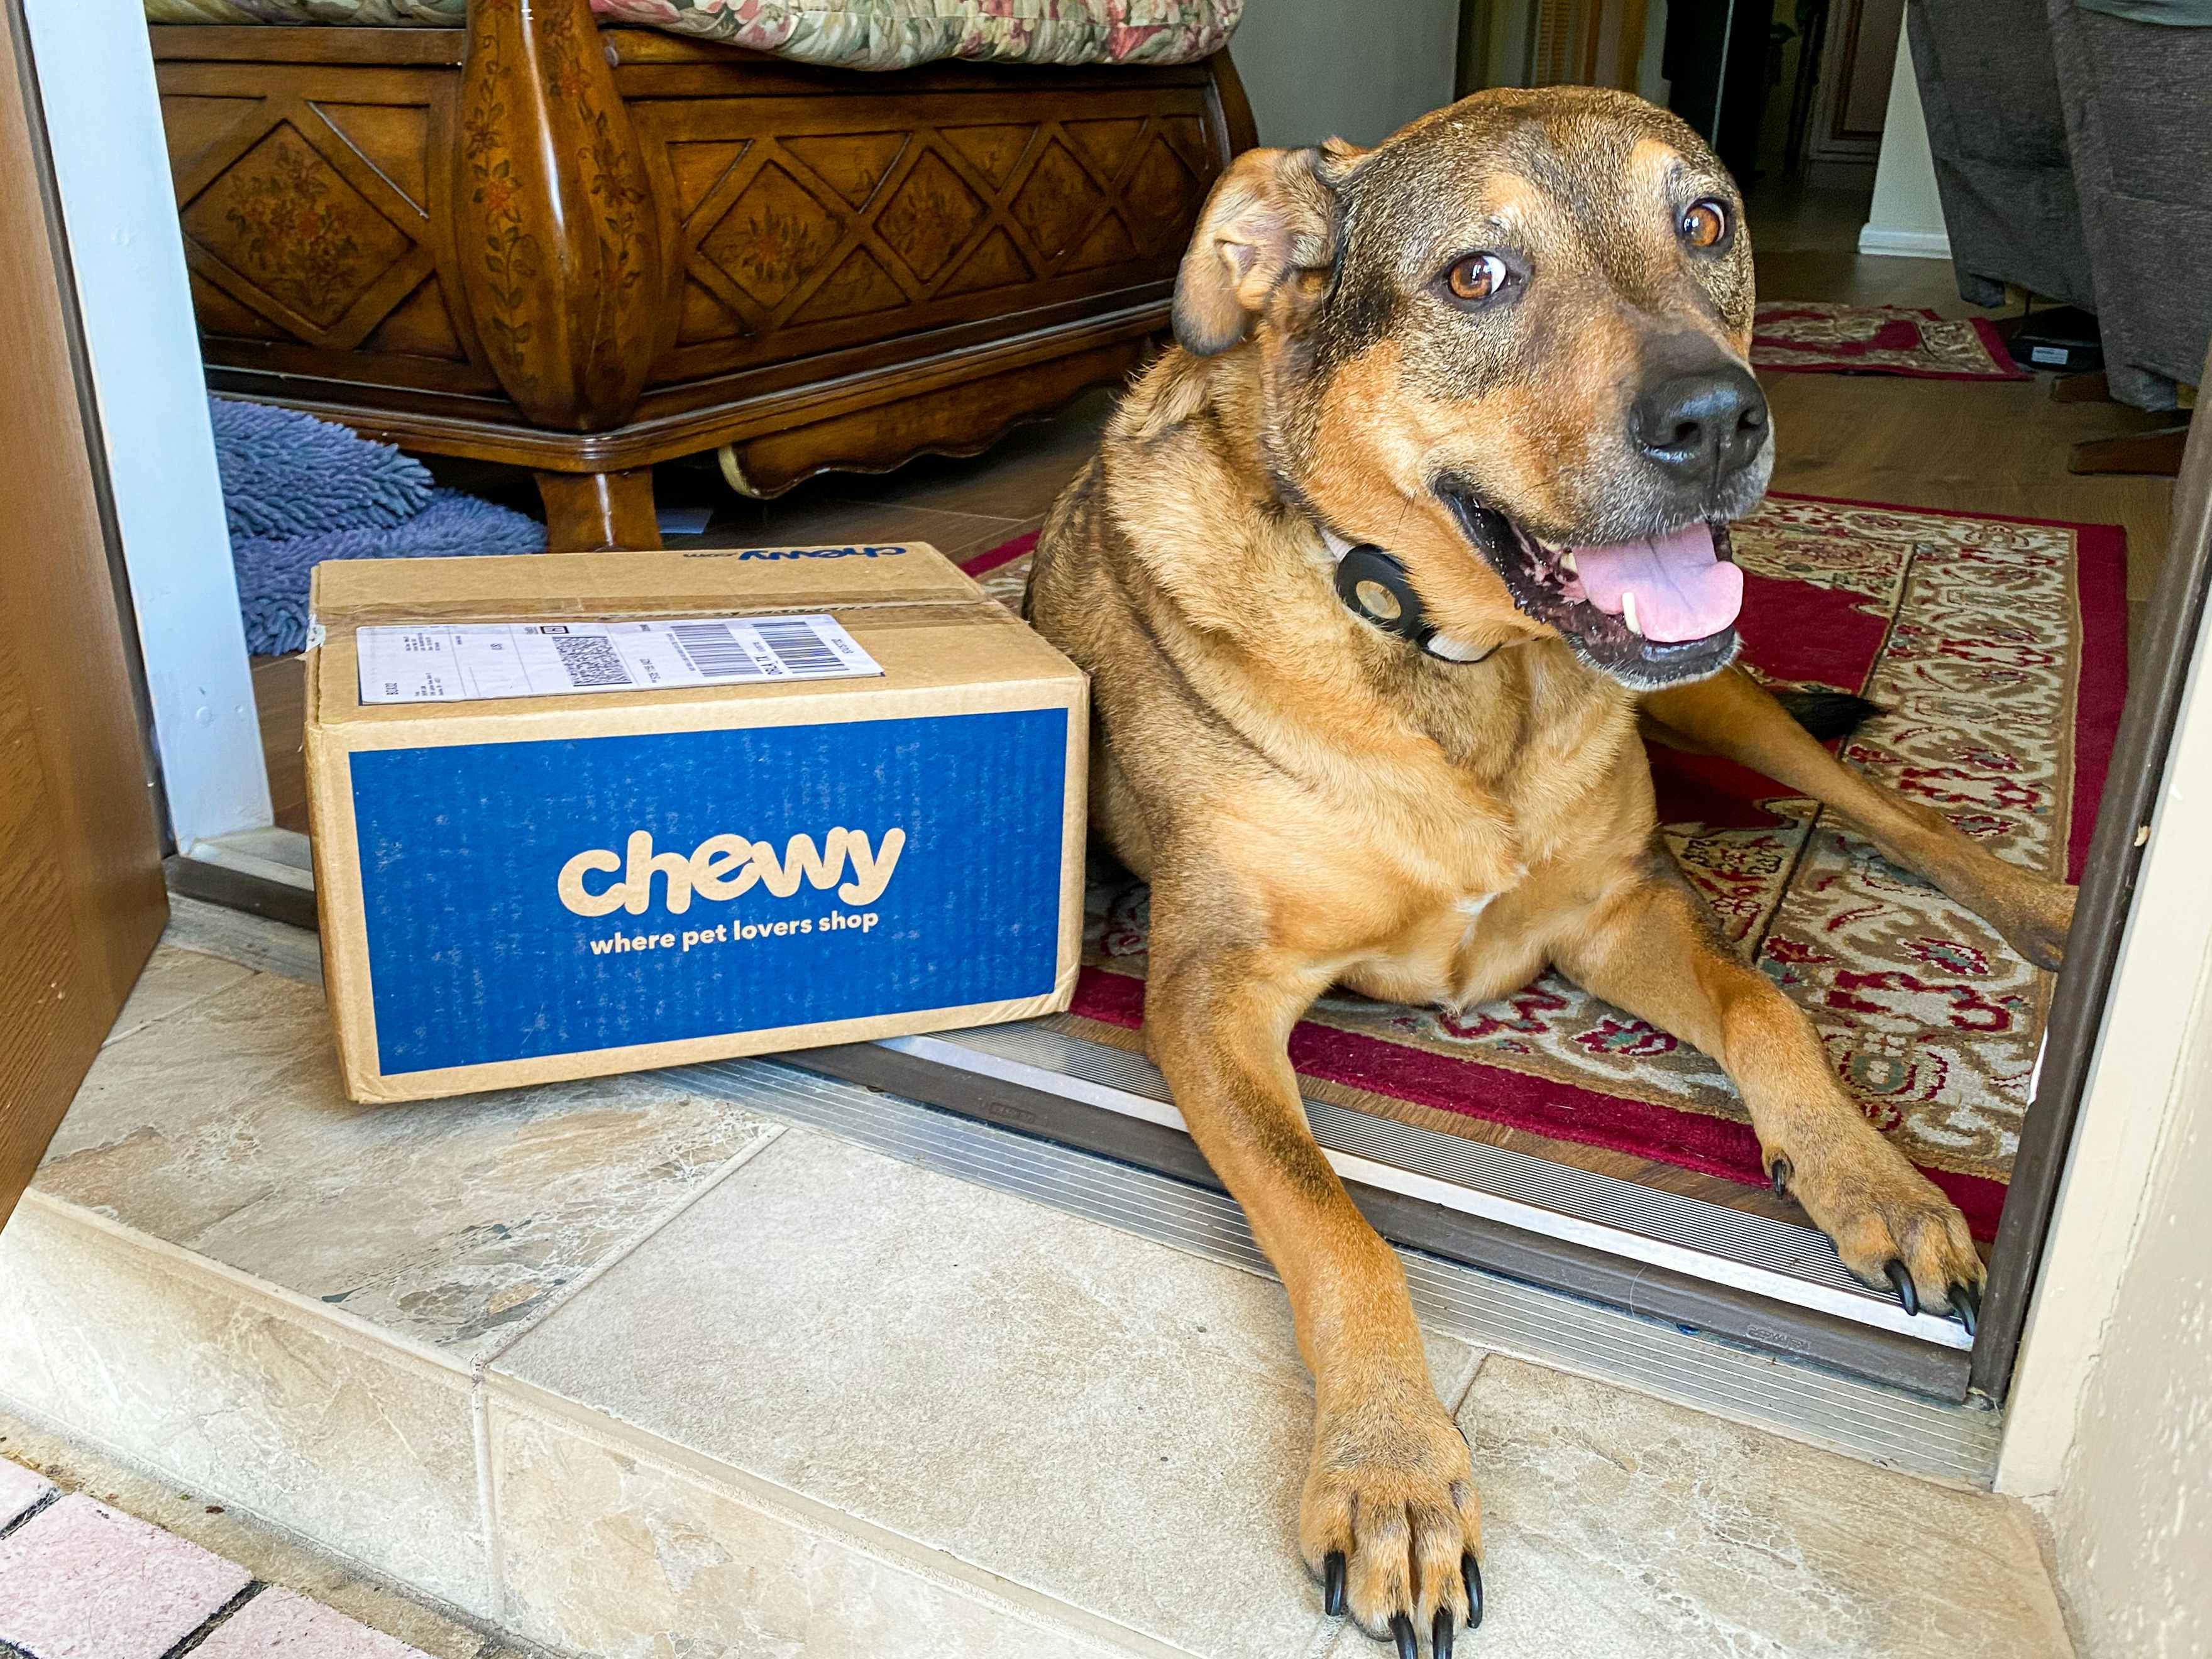 A dog laying in a front doorway with a Chewy box next to it.